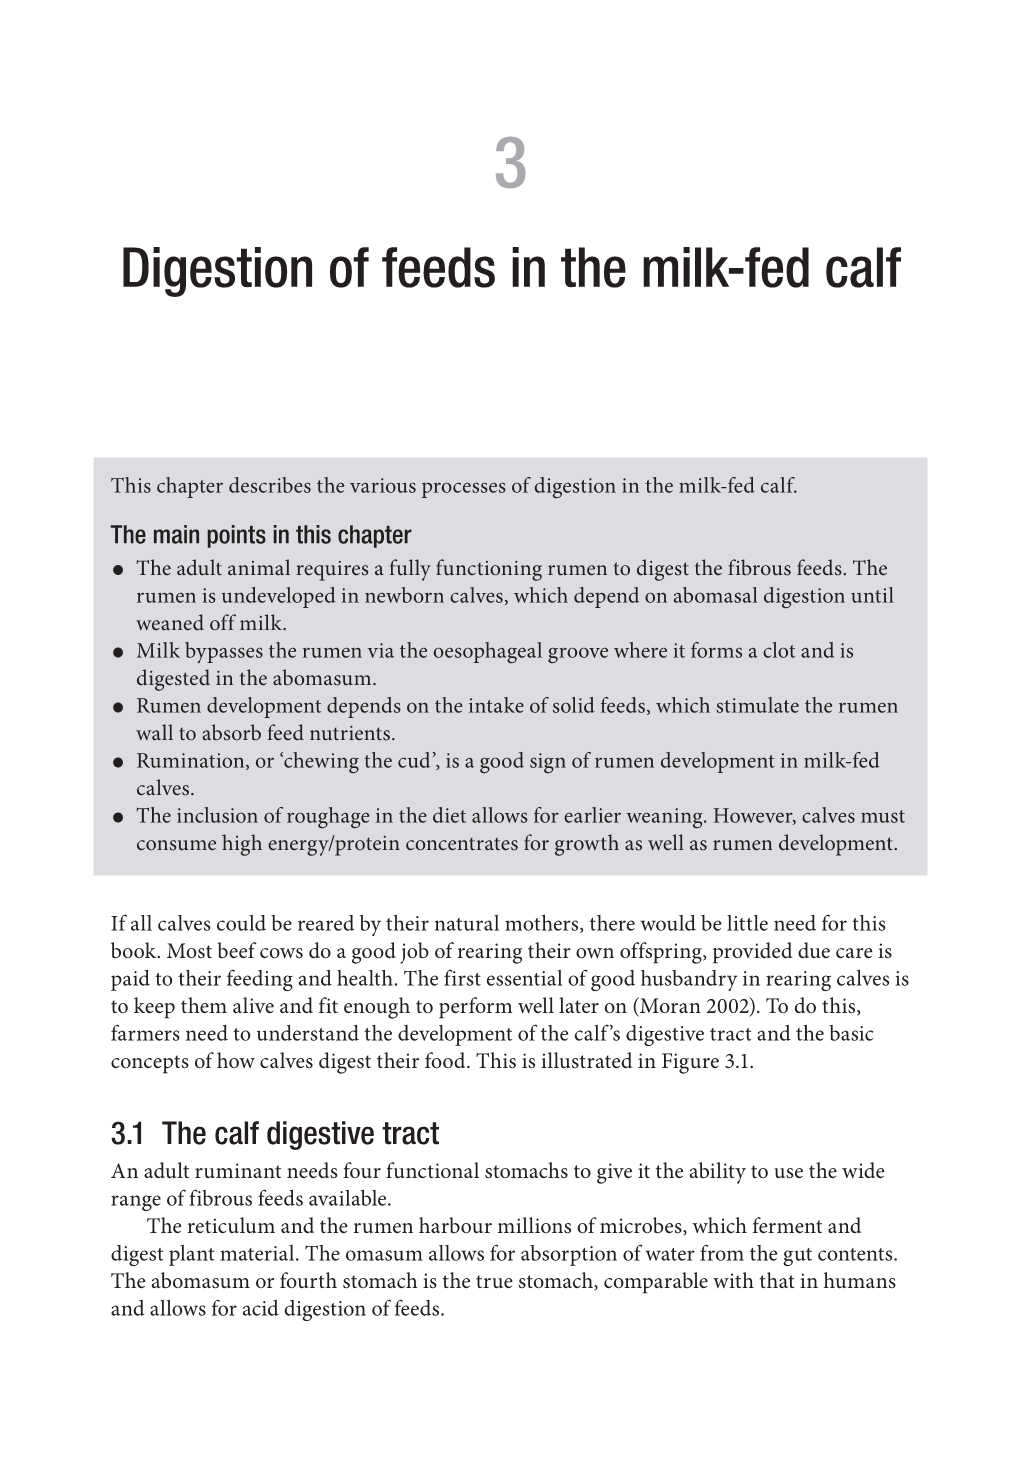 Digestion of Feeds in the Milk-Fed Calf